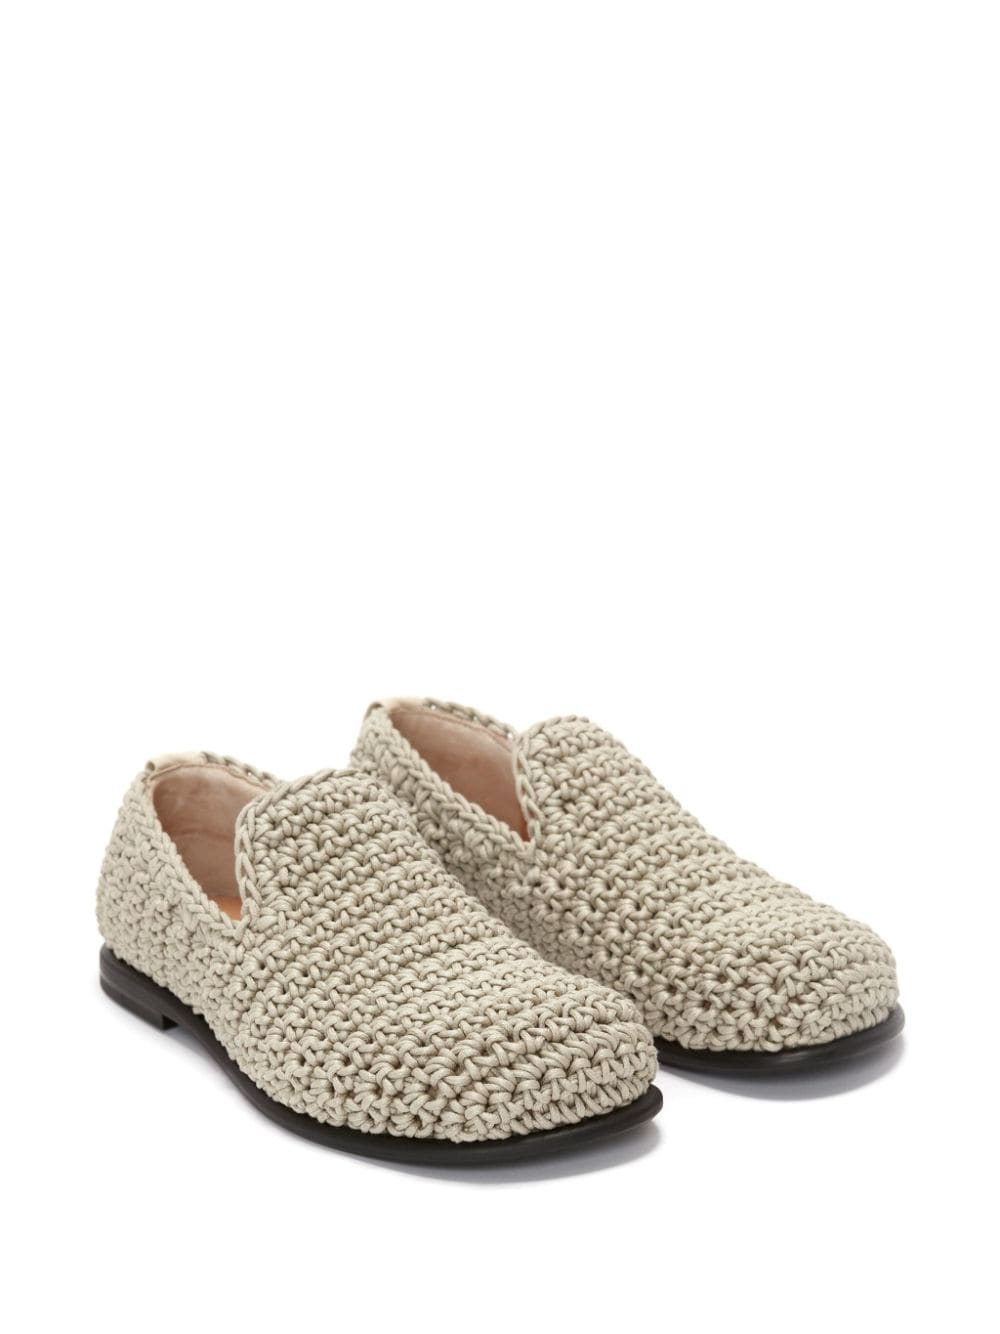 JW Anderson Mocassin loafers - Beige